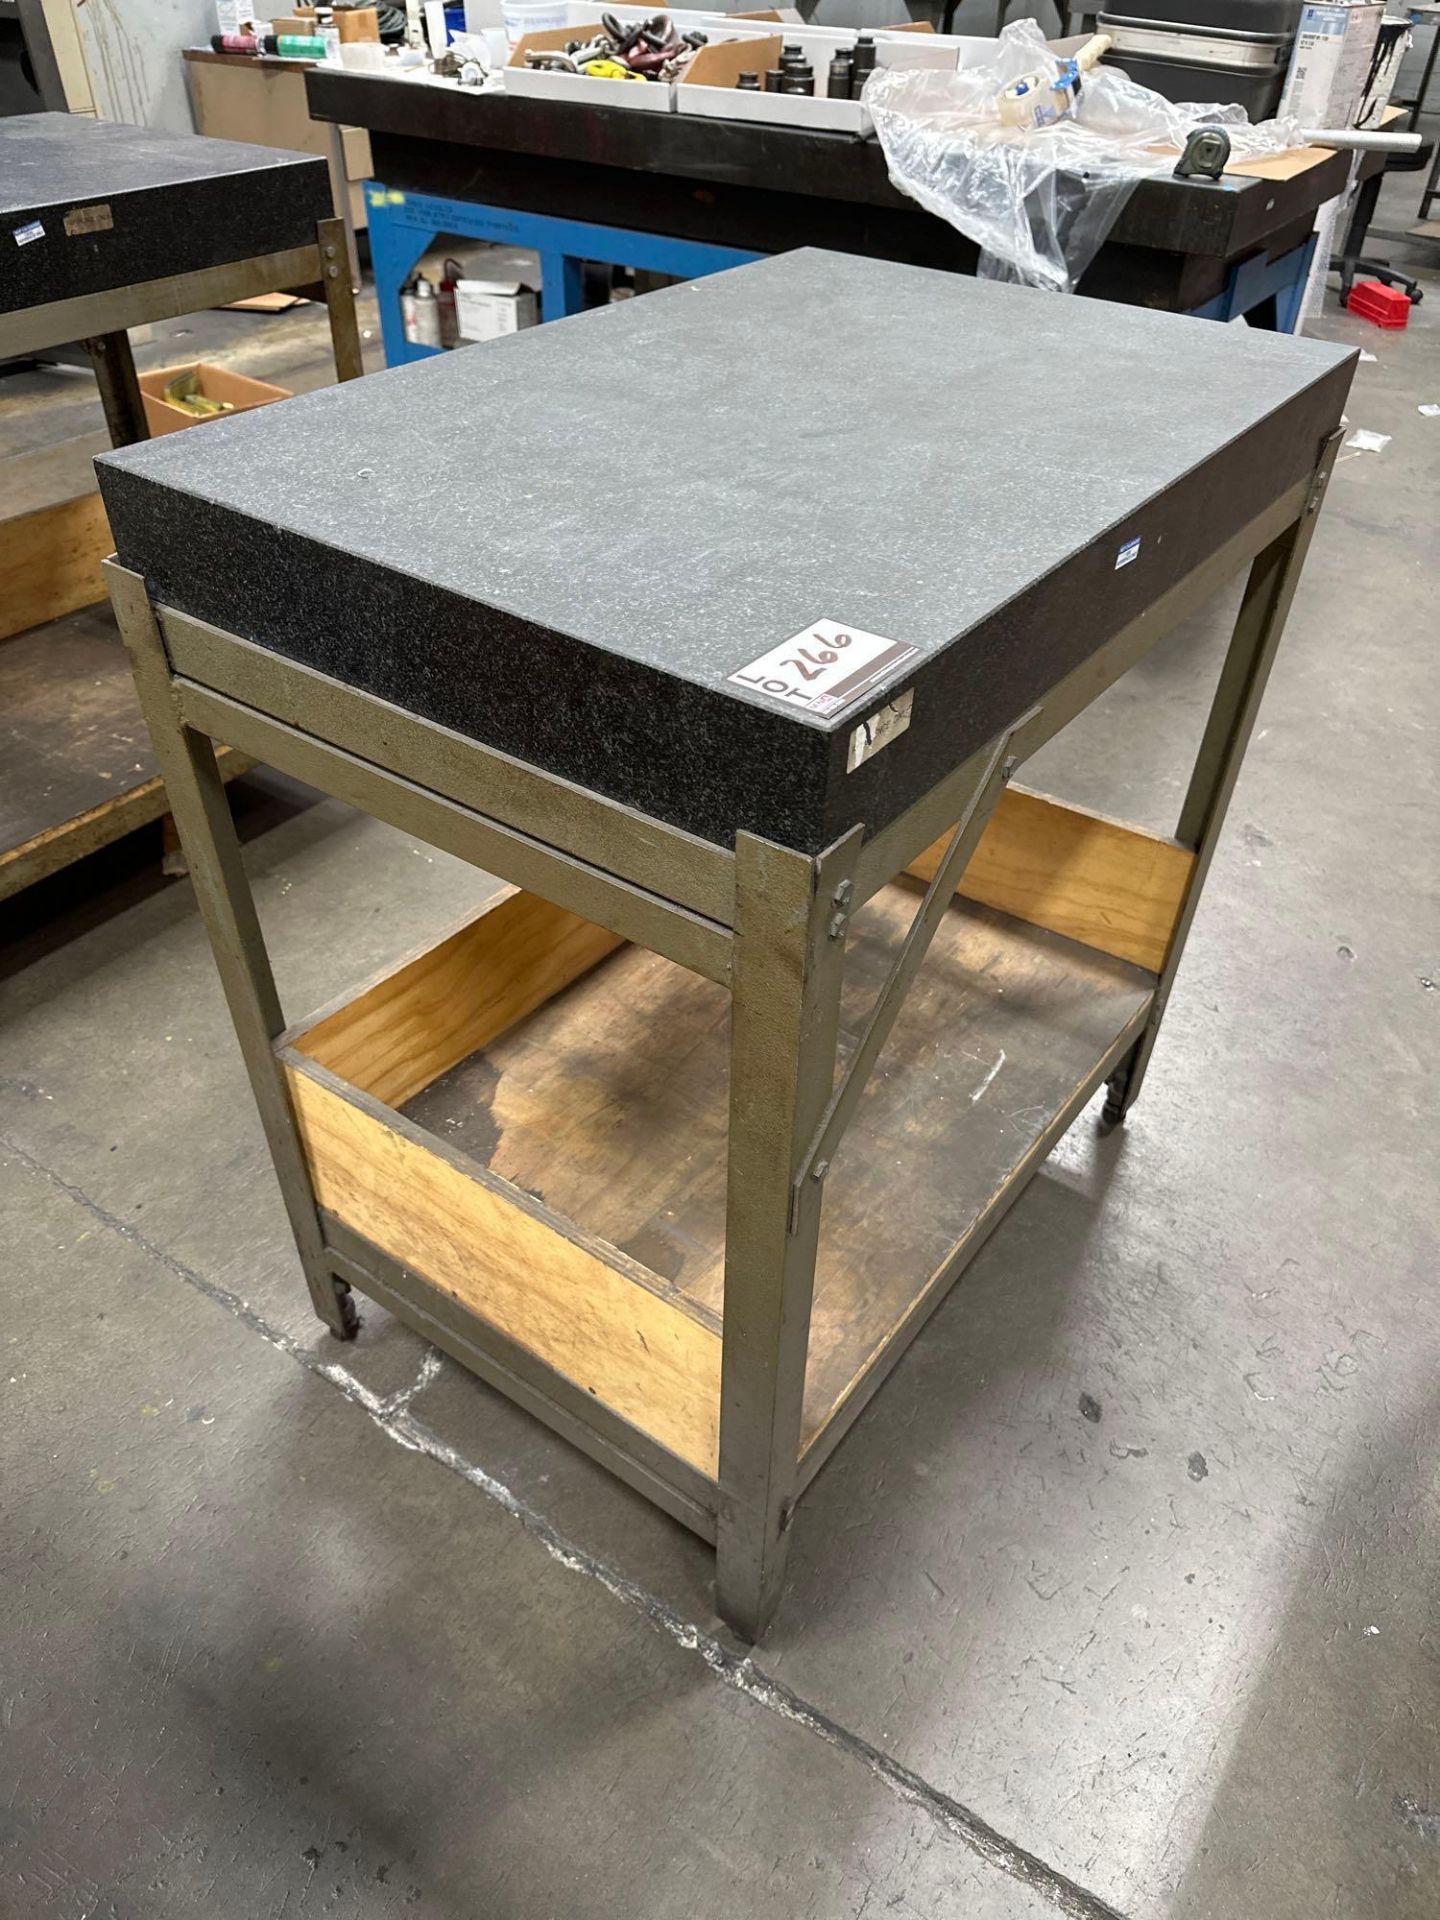 4” x 24” x 36” Granite Surface Plate w/ Steel Stand - Image 2 of 4